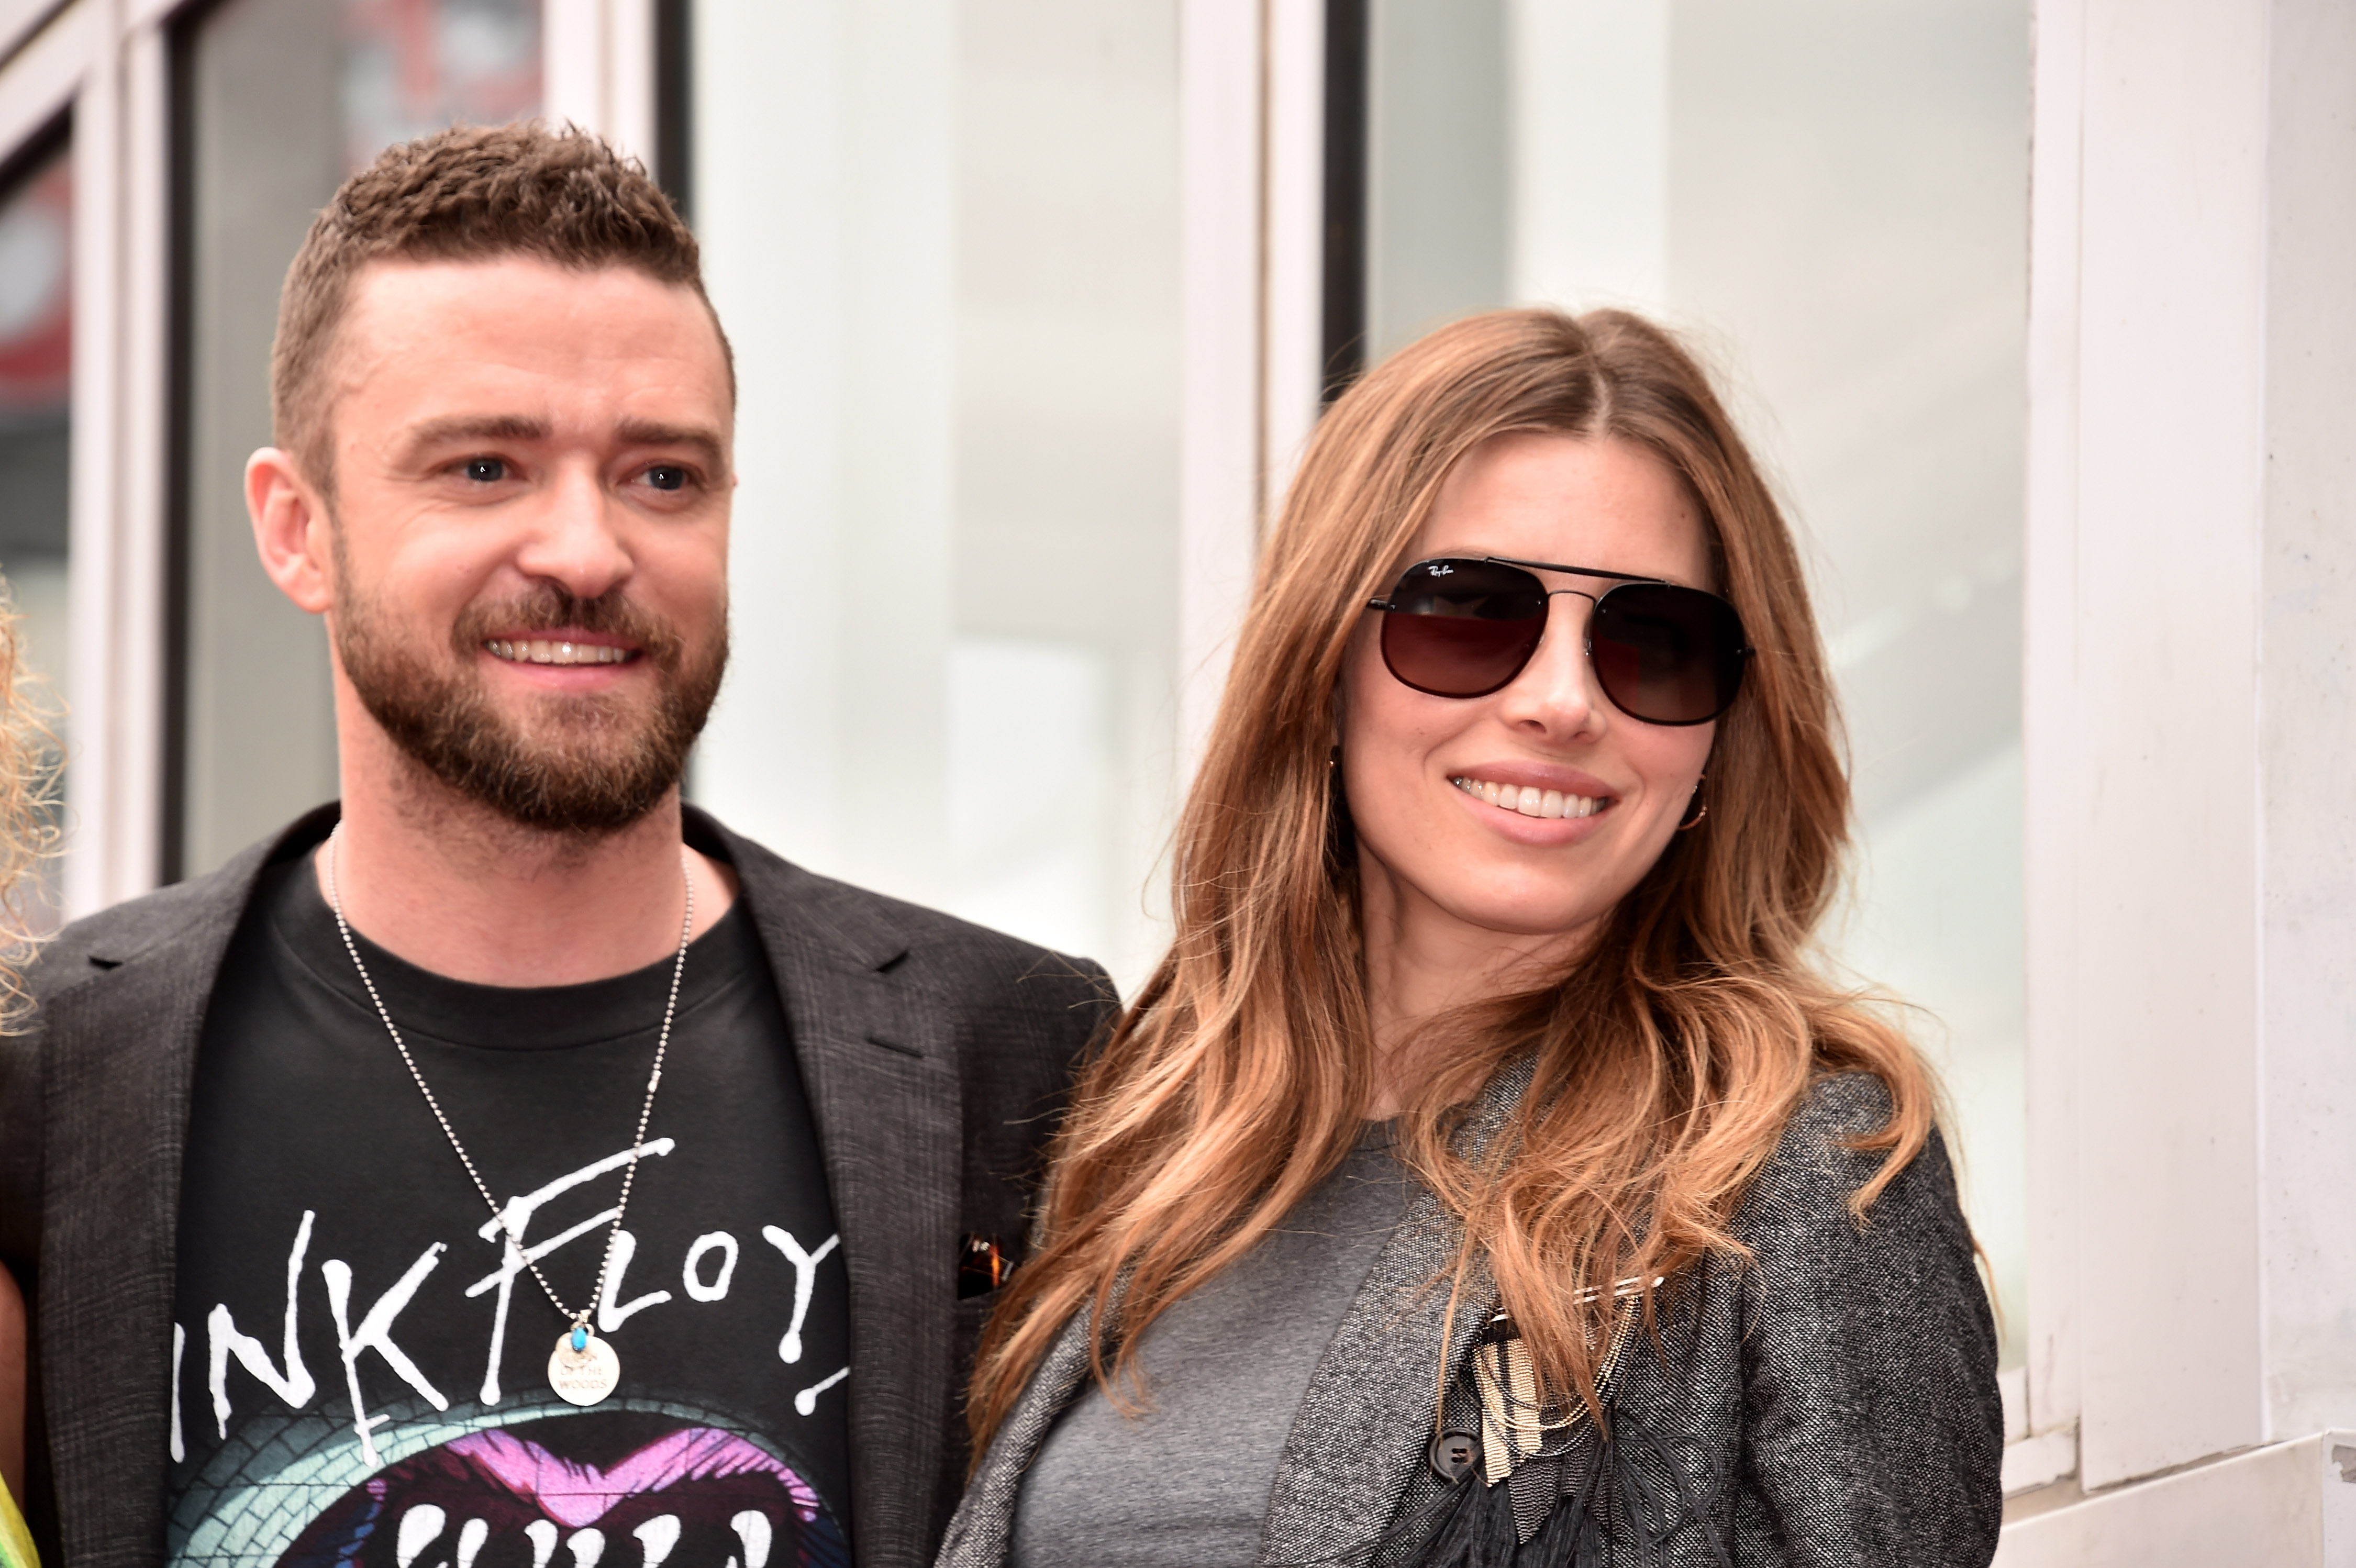 Justin Timberlake Had Too Much To Drink & Feels “Guilty” For PDA Photo: Report